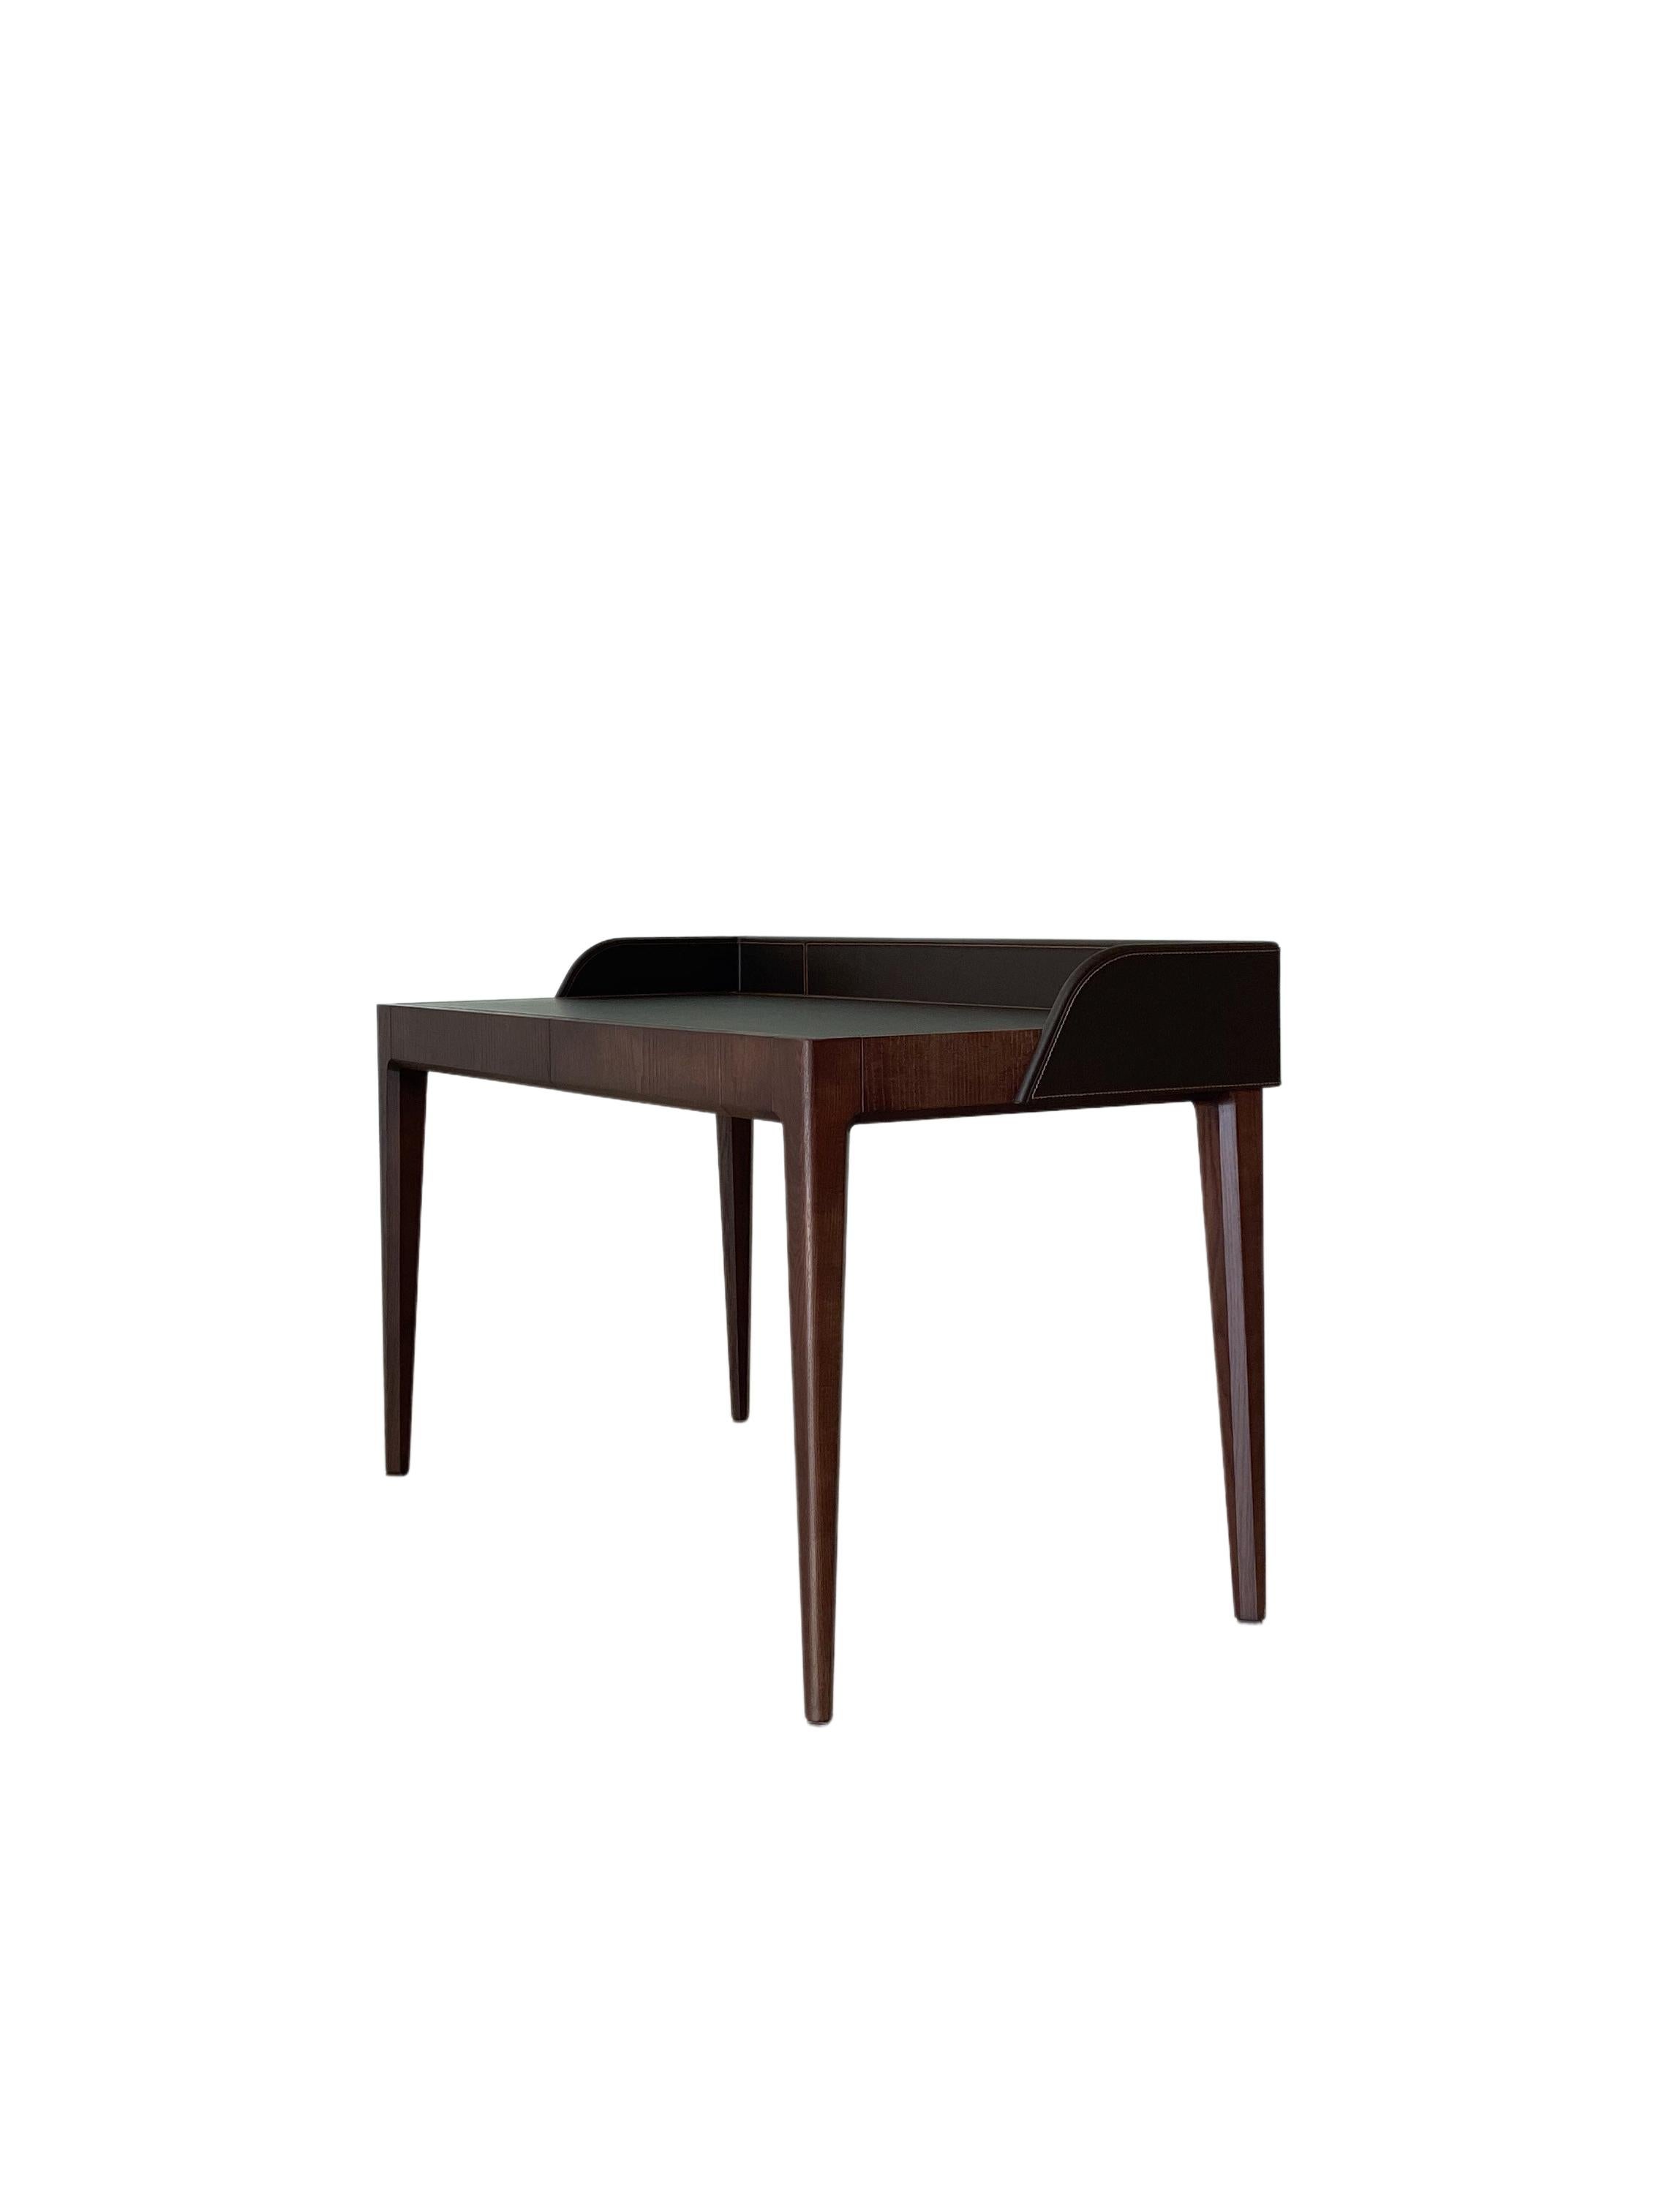 Contemporary Desk Made of Ashwood with Leather Flapping Top, by Morelato 5